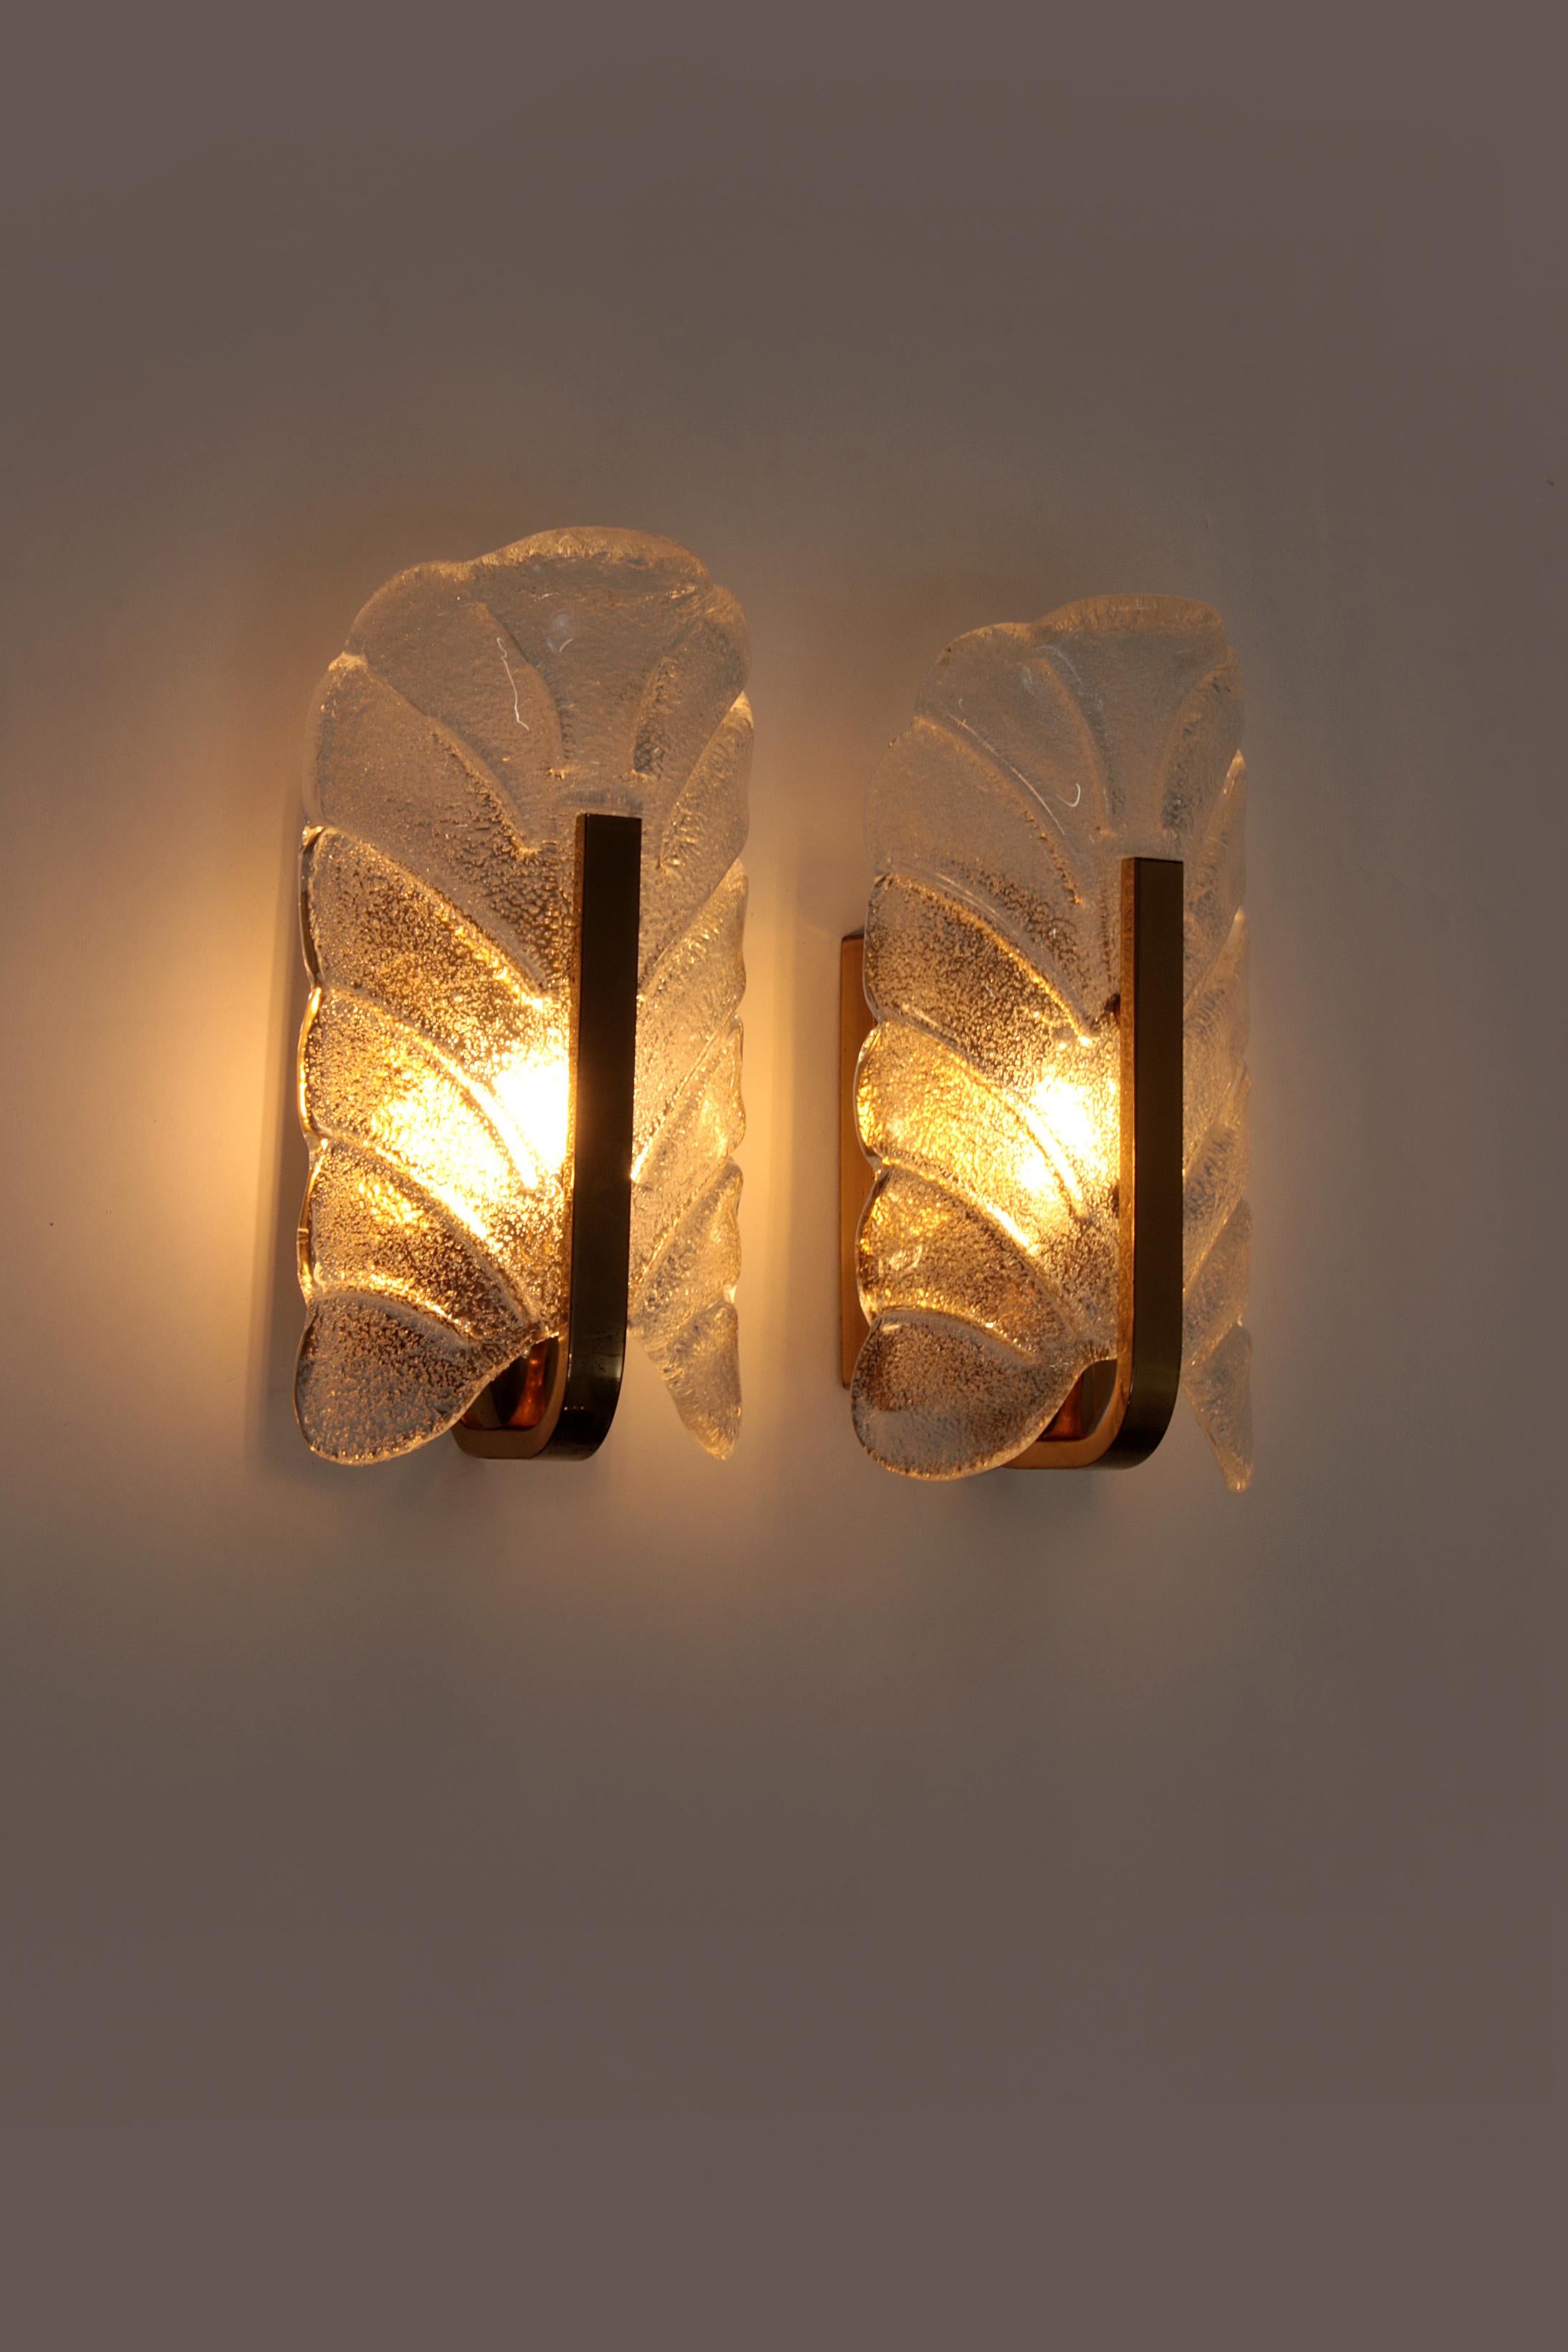 Hollywood Regency Carl Fagerlund set Wall lamps, 1970 Sweden. For Sale